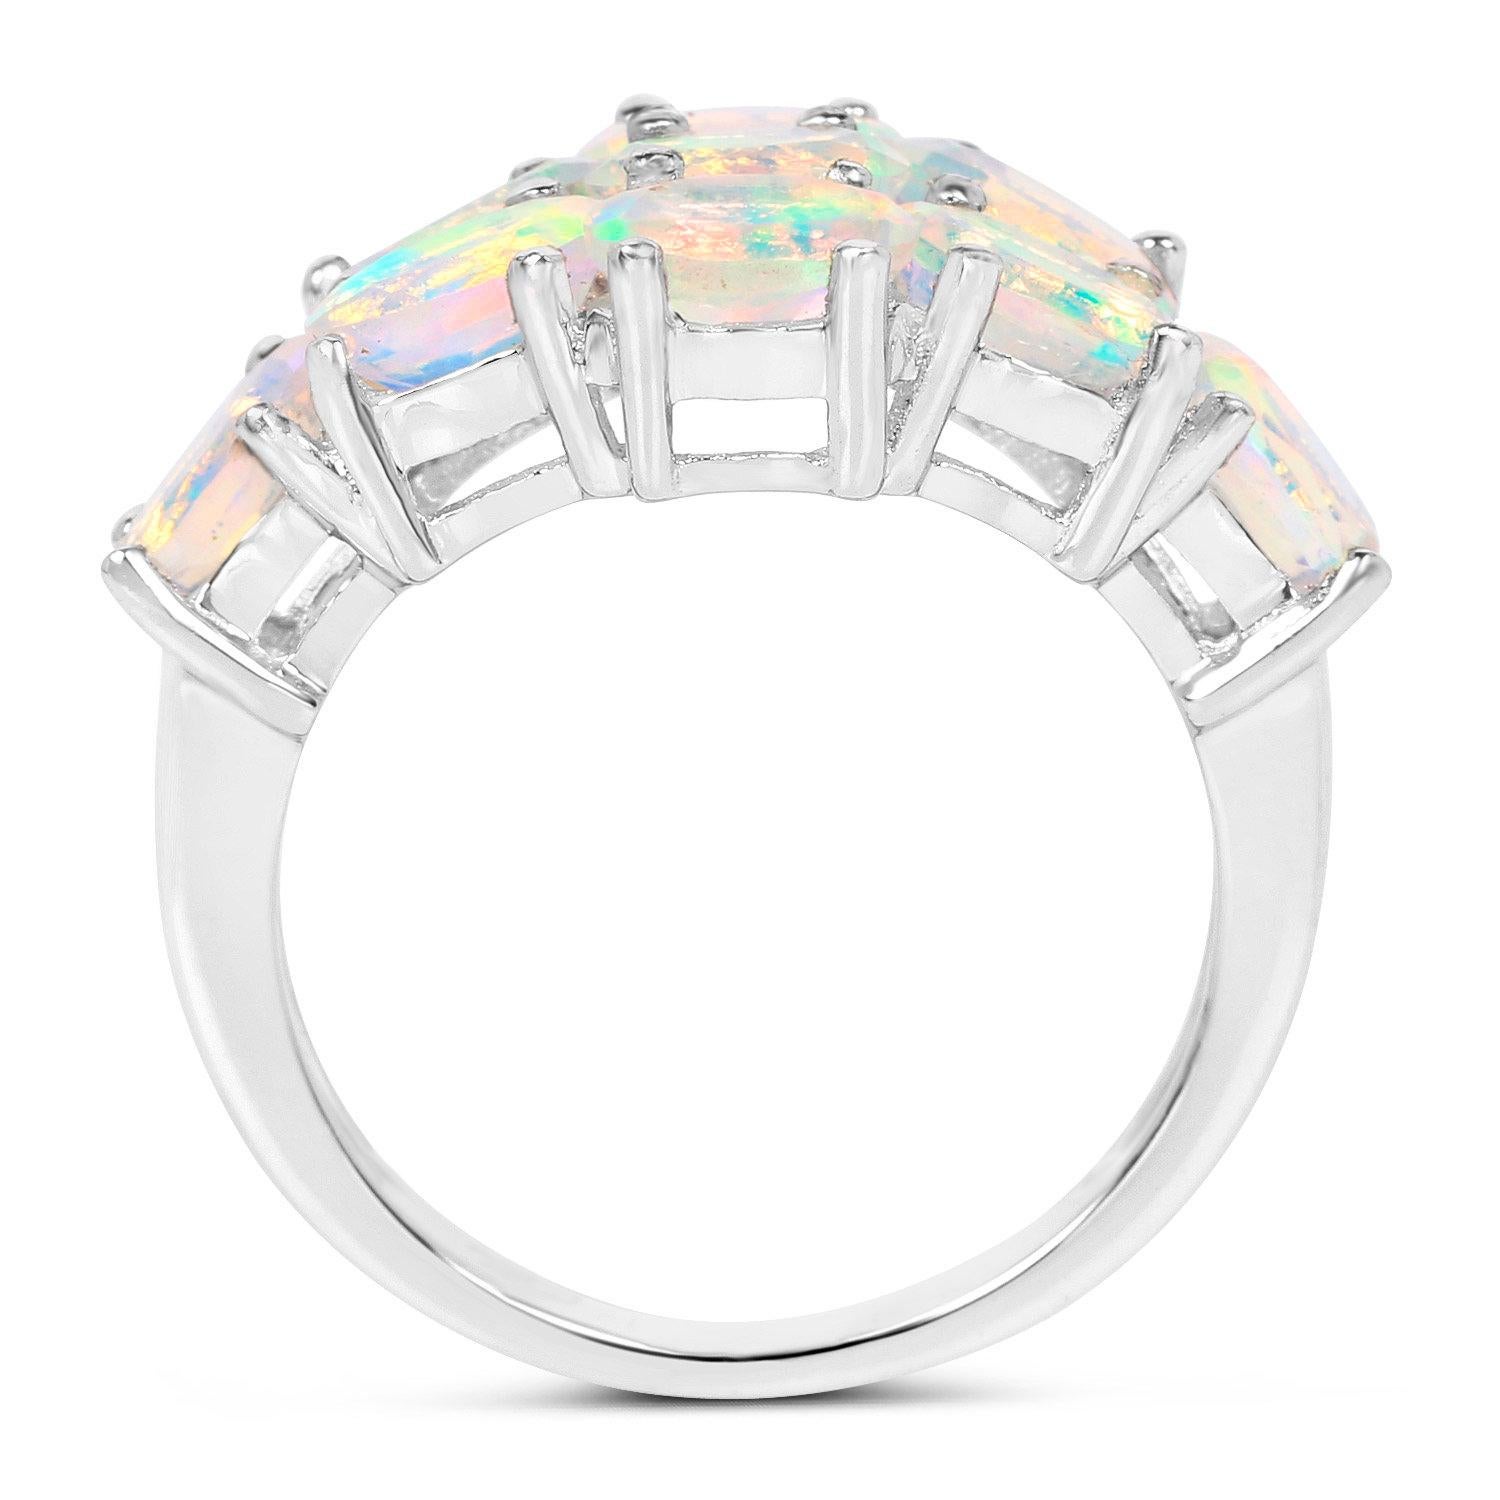 Faceted 2.15 Carats Ethiopian Opal Cluster Ring Sterling Silver In Excellent Condition For Sale In Laguna Niguel, CA